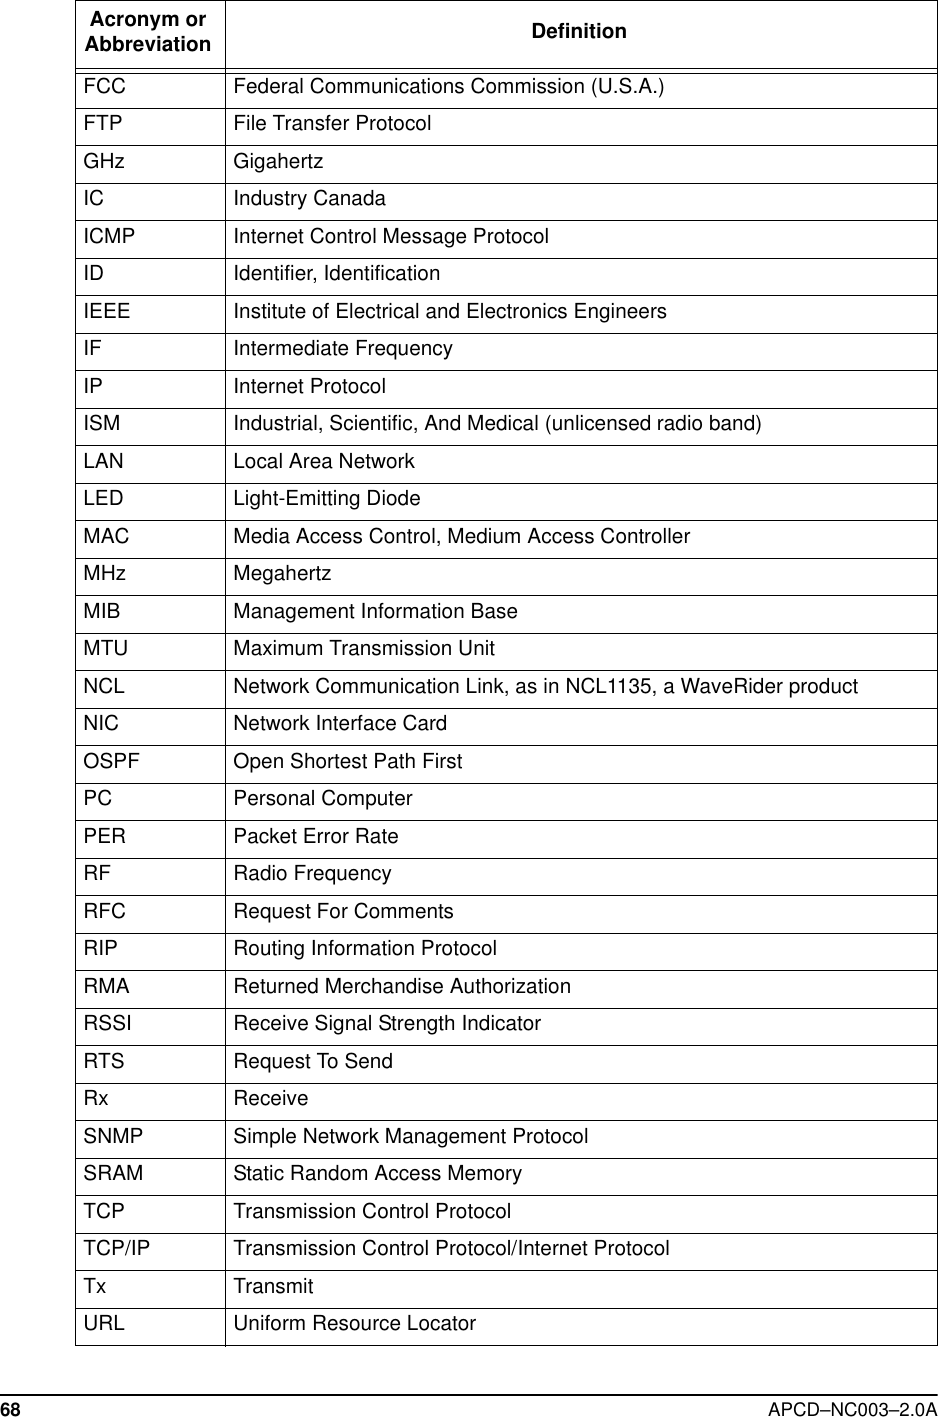   68 APCD–NC003–2.0AFCC Federal Communications Commission (U.S.A.)FTP File Transfer ProtocolGHz GigahertzIC Industry CanadaICMP Internet Control Message ProtocolID Identifier, IdentificationIEEE Institute of Electrical and Electronics EngineersIF Intermediate FrequencyIP Internet ProtocolISM Industrial, Scientific, And Medical (unlicensed radio band)LAN Local Area NetworkLED Light-Emitting DiodeMAC Media Access Control, Medium Access ControllerMHz MegahertzMIB Management Information BaseMTU Maximum Transmission UnitNCL Network Communication Link, as in NCL1135, a WaveRider productNIC Network Interface CardOSPF Open Shortest Path FirstPC Personal ComputerPER Packet Error RateRF Radio FrequencyRFC Request For CommentsRIP Routing Information ProtocolRMA Returned Merchandise AuthorizationRSSI Receive Signal Strength IndicatorRTS Request To SendRx ReceiveSNMP Simple Network Management ProtocolSRAM Static Random Access MemoryTCP Transmission Control ProtocolTCP/IP Transmission Control Protocol/Internet ProtocolTx TransmitURL Uniform Resource LocatorAcronym or Abbreviation Definition